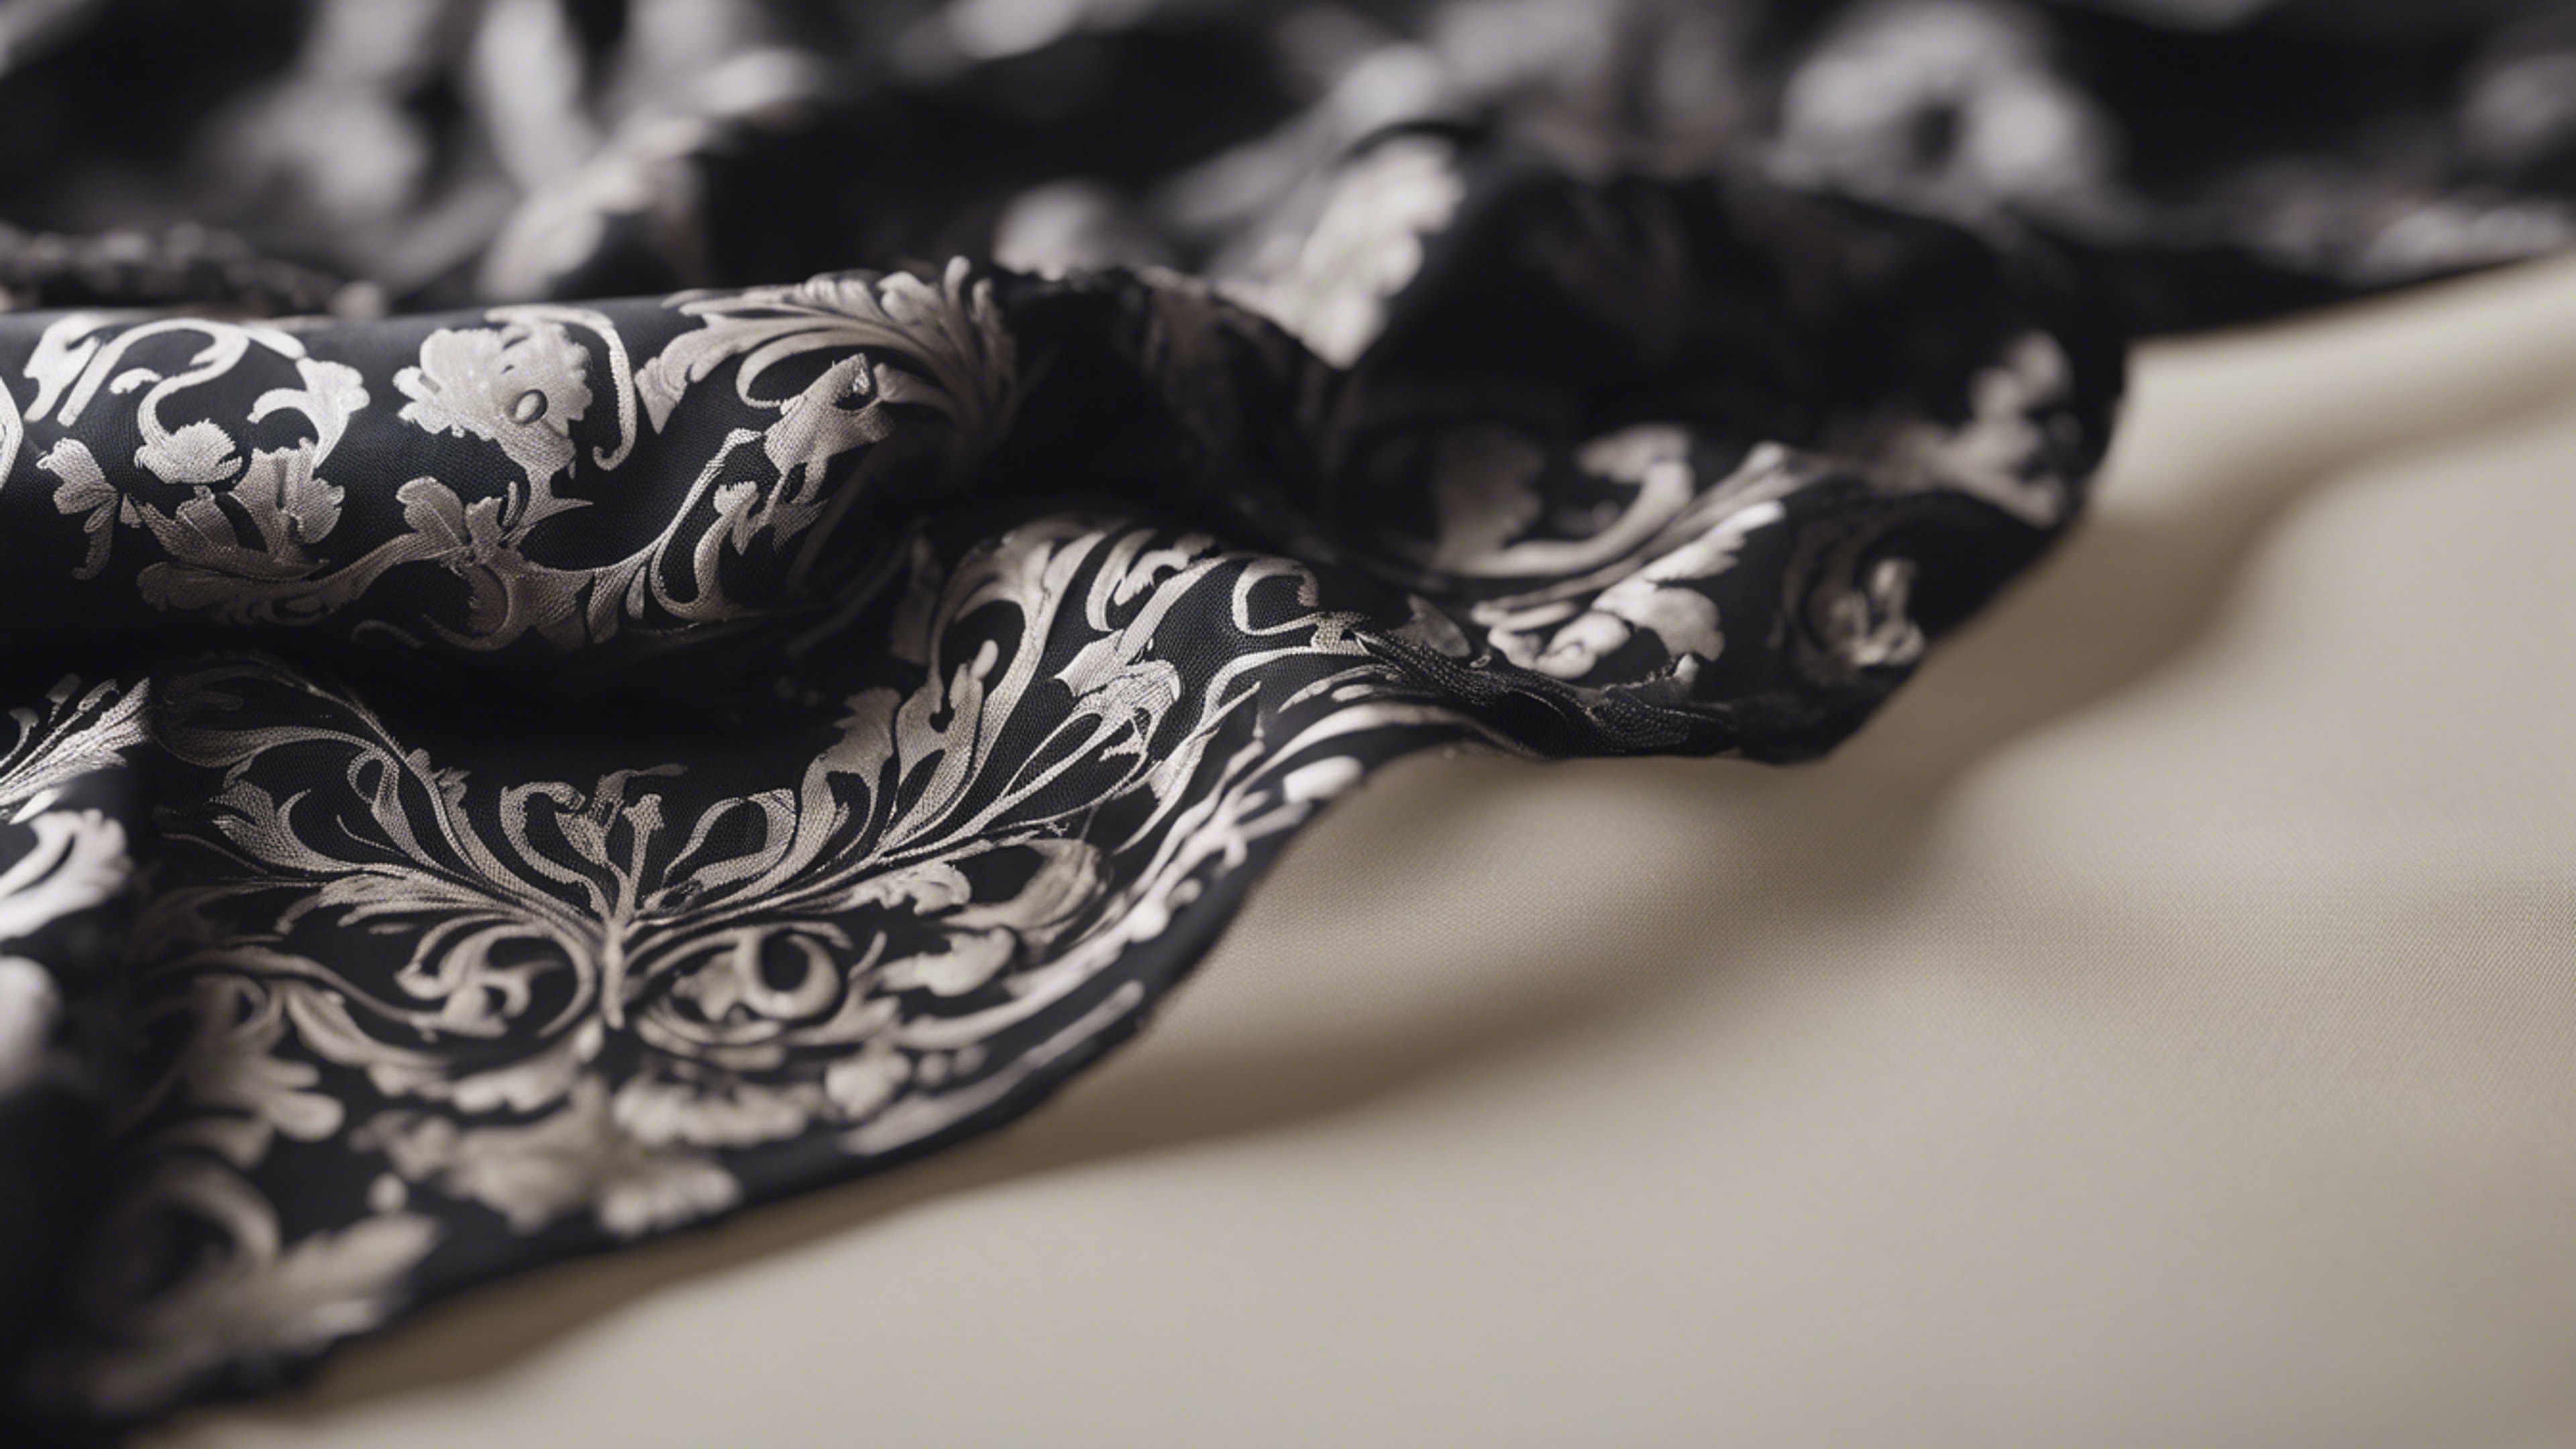 A piece of black damask fabric flowing in the wind on a neutral background. Behang[14b62583c63644549a6a]